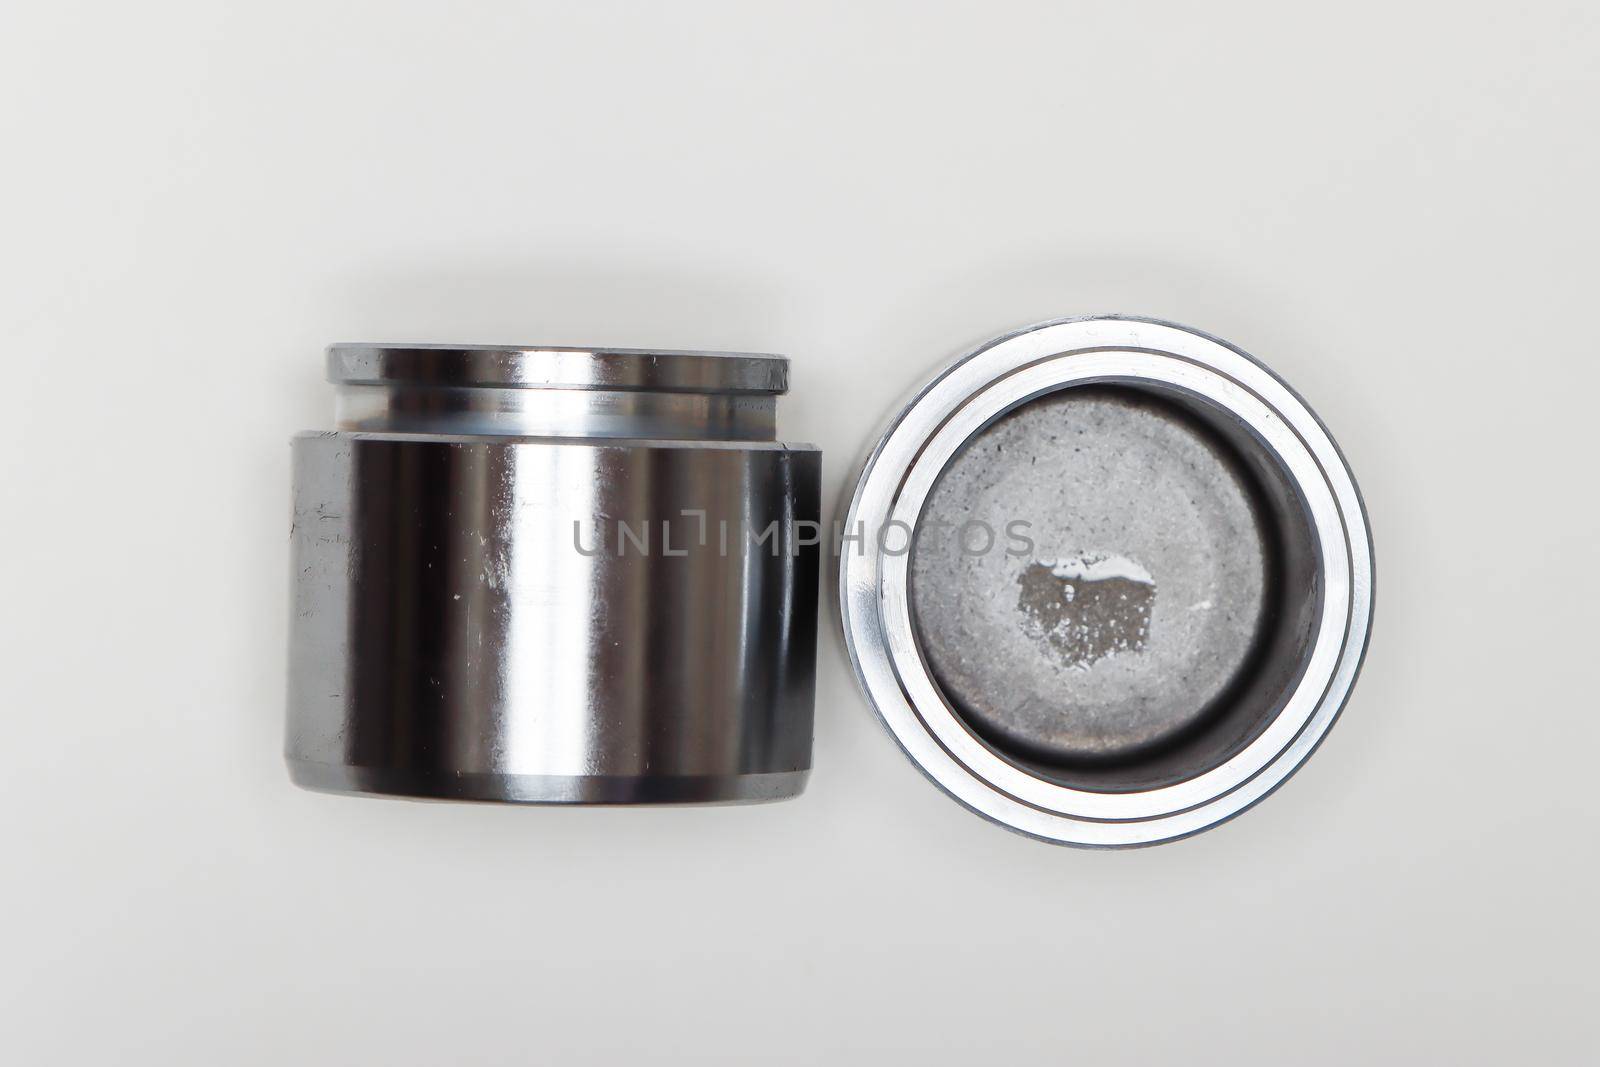 Two metal cylindrical pistons, machine repair parts. A set of spare parts for servicing the braking system of a vehicle. Details on white background, copy space available.